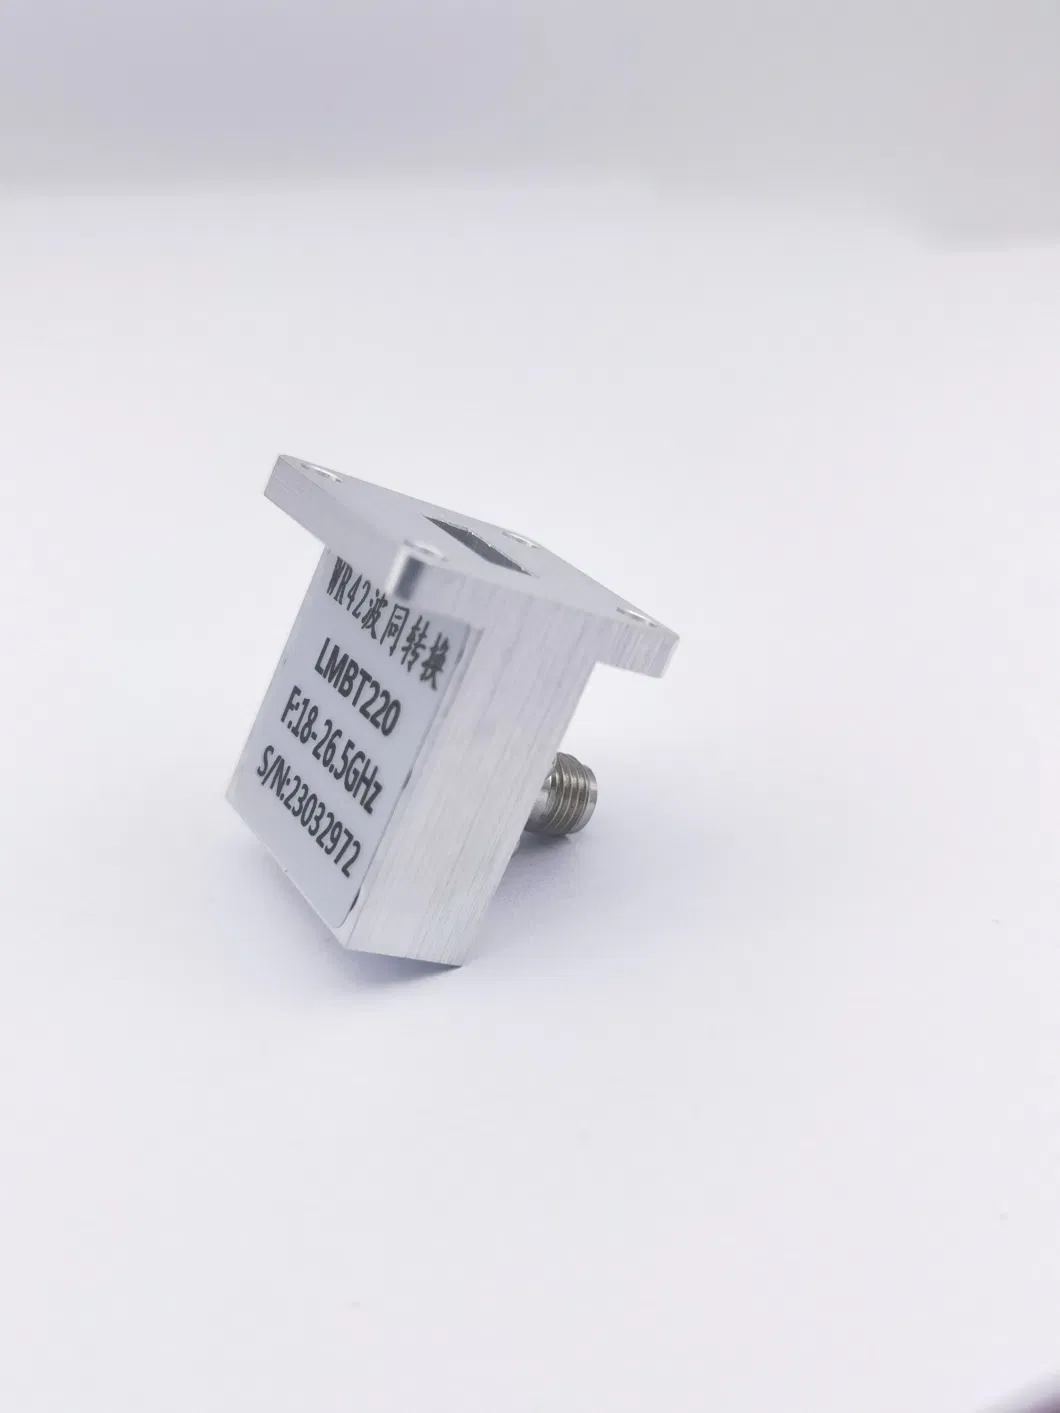 Wr42 18GHz~26.5GHz Yuecome Waveguide to Coaxial Adaptor SMA or 2.92mm